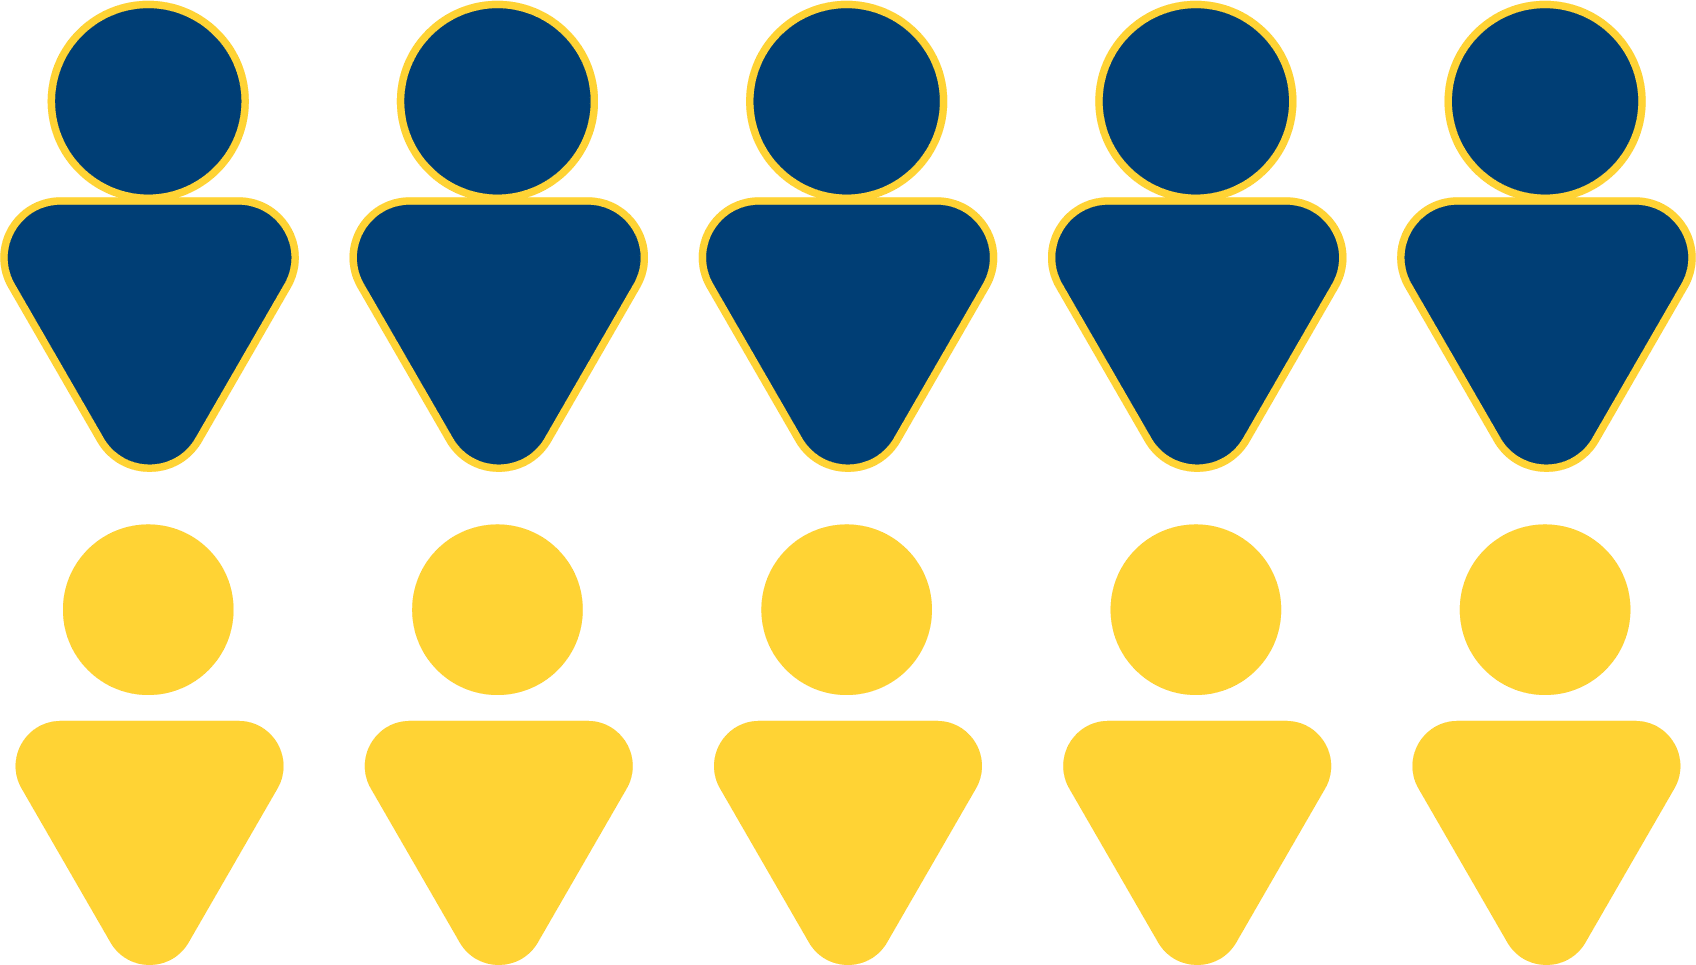 Graphic shows 10 person icons, representing 10 families. 5 of the icons are blue and 5 of the icons are yellow, showing that slightly more than half of families indicate that their student is not comfortable asking adults for their help at school